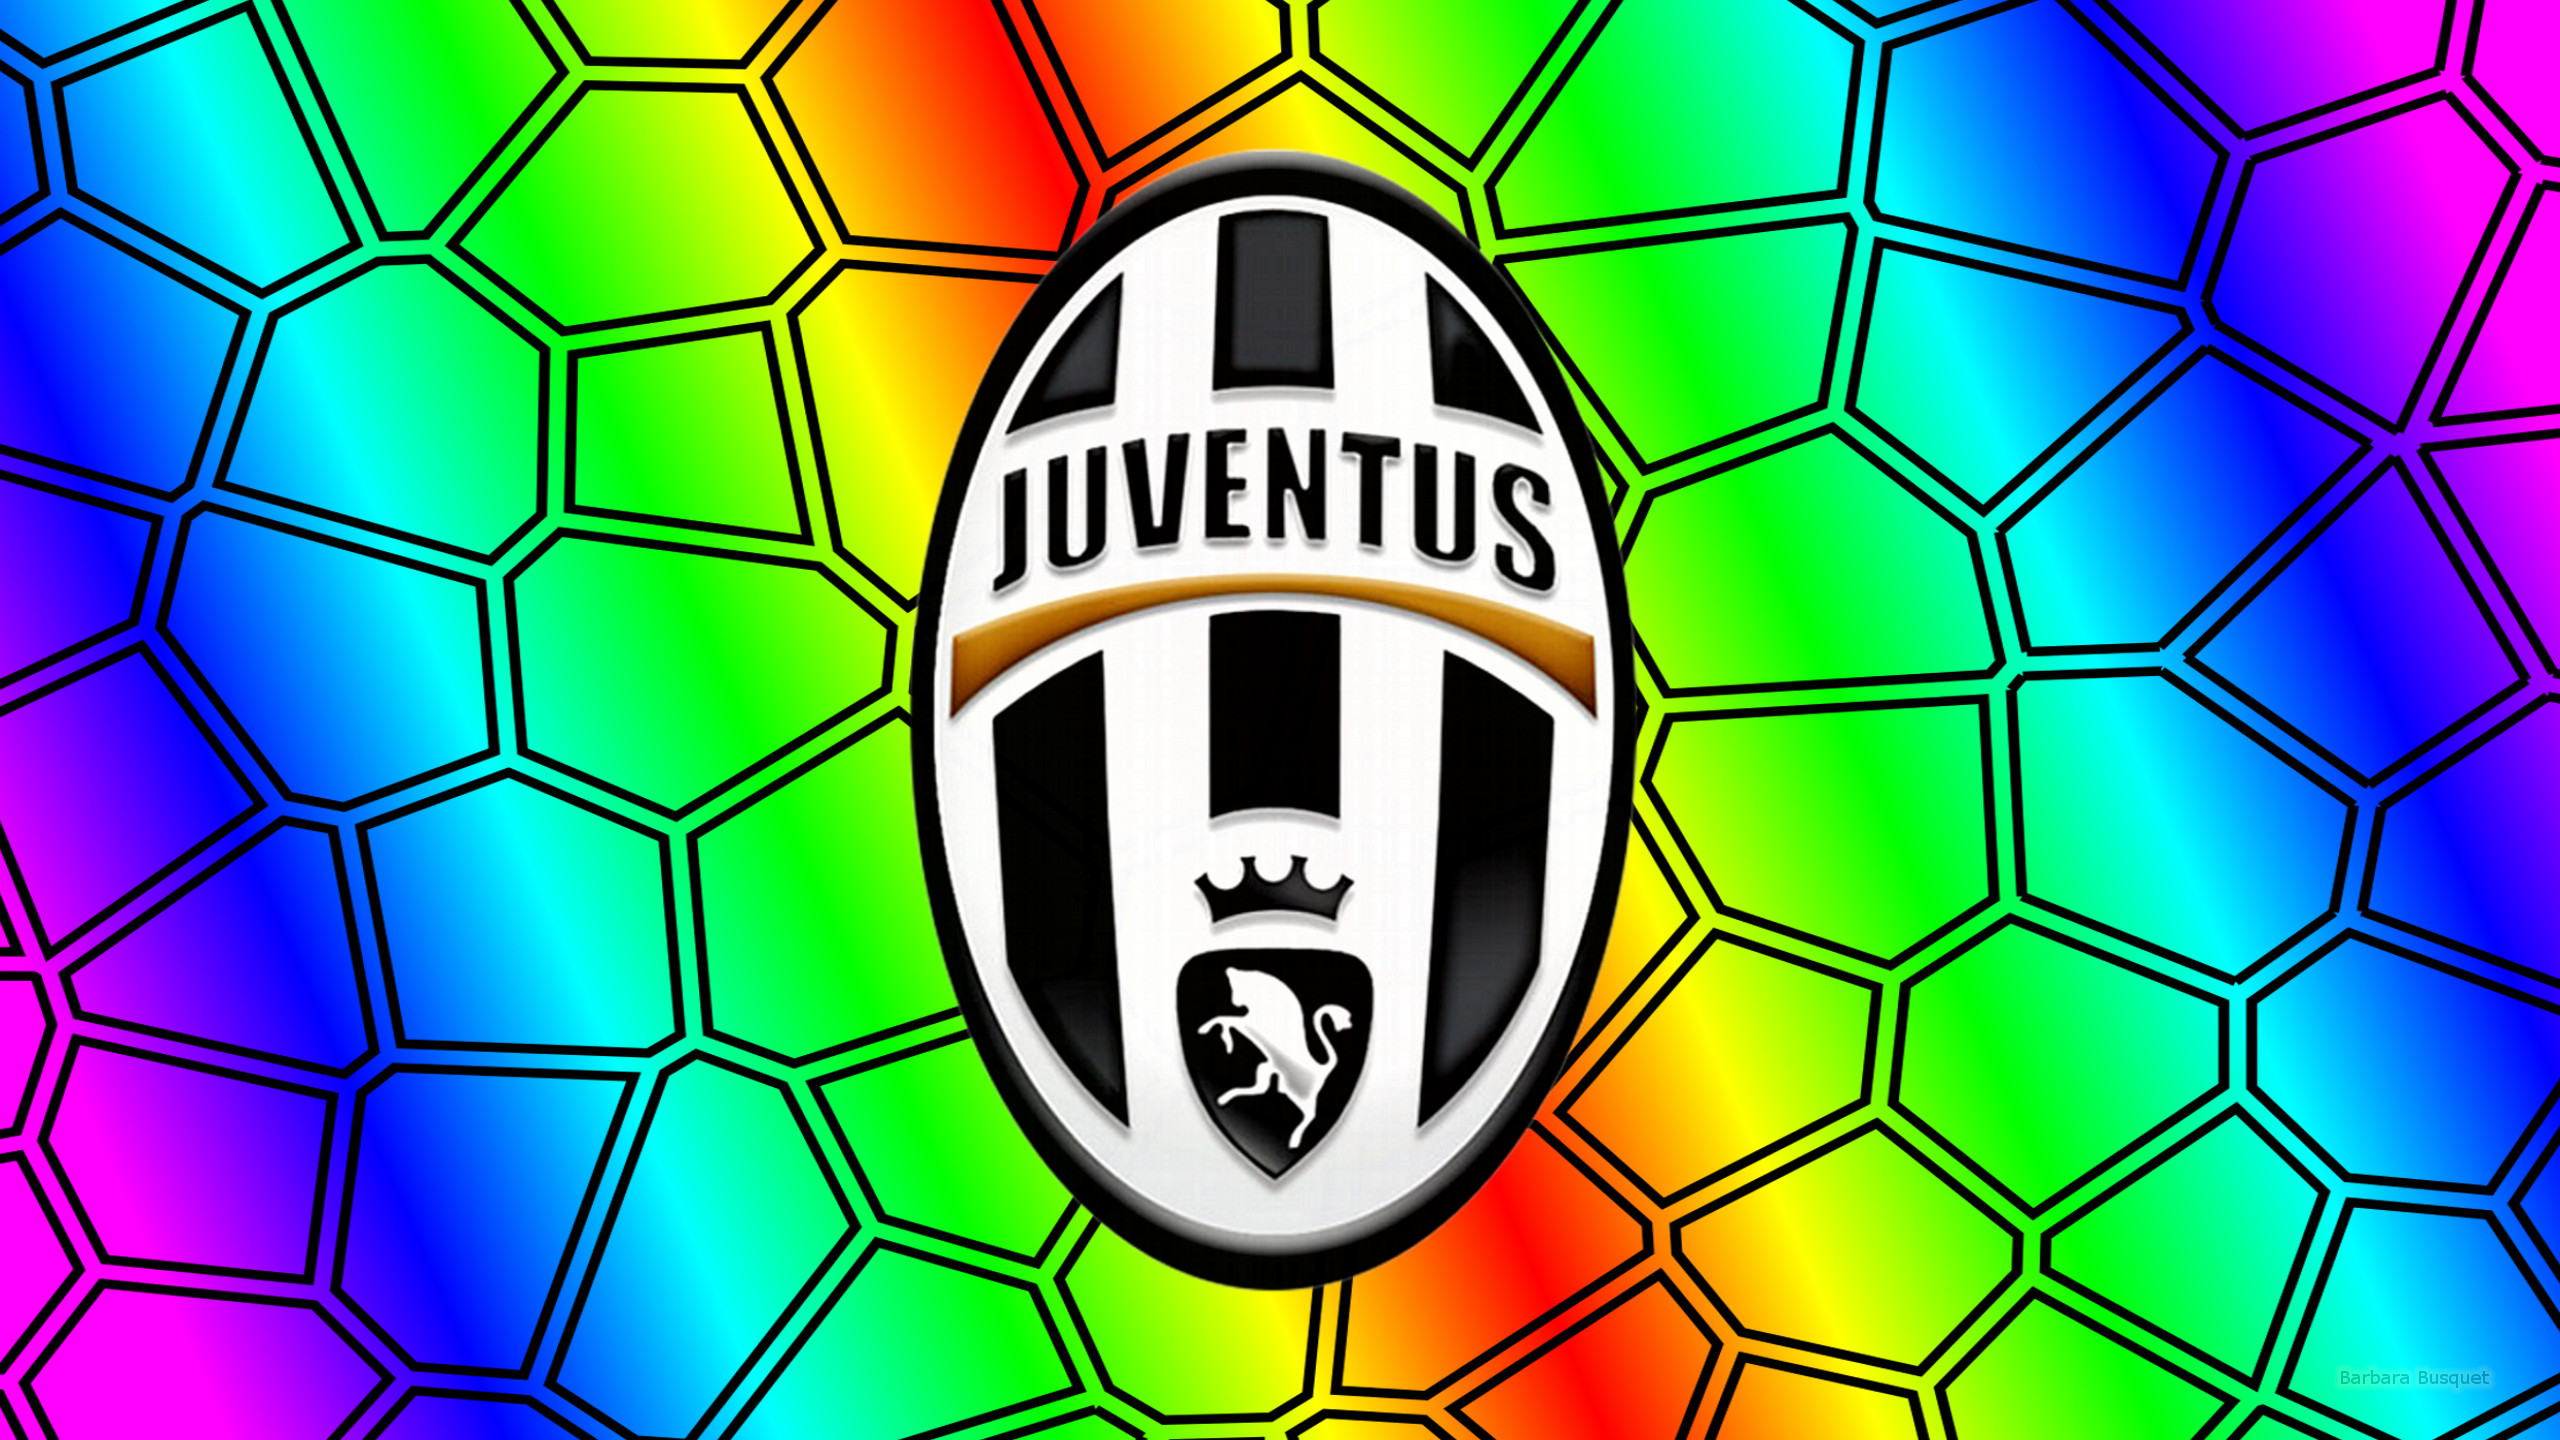 Cover Iphone 11 Pro Max Juventus , HD Wallpaper & Backgrounds